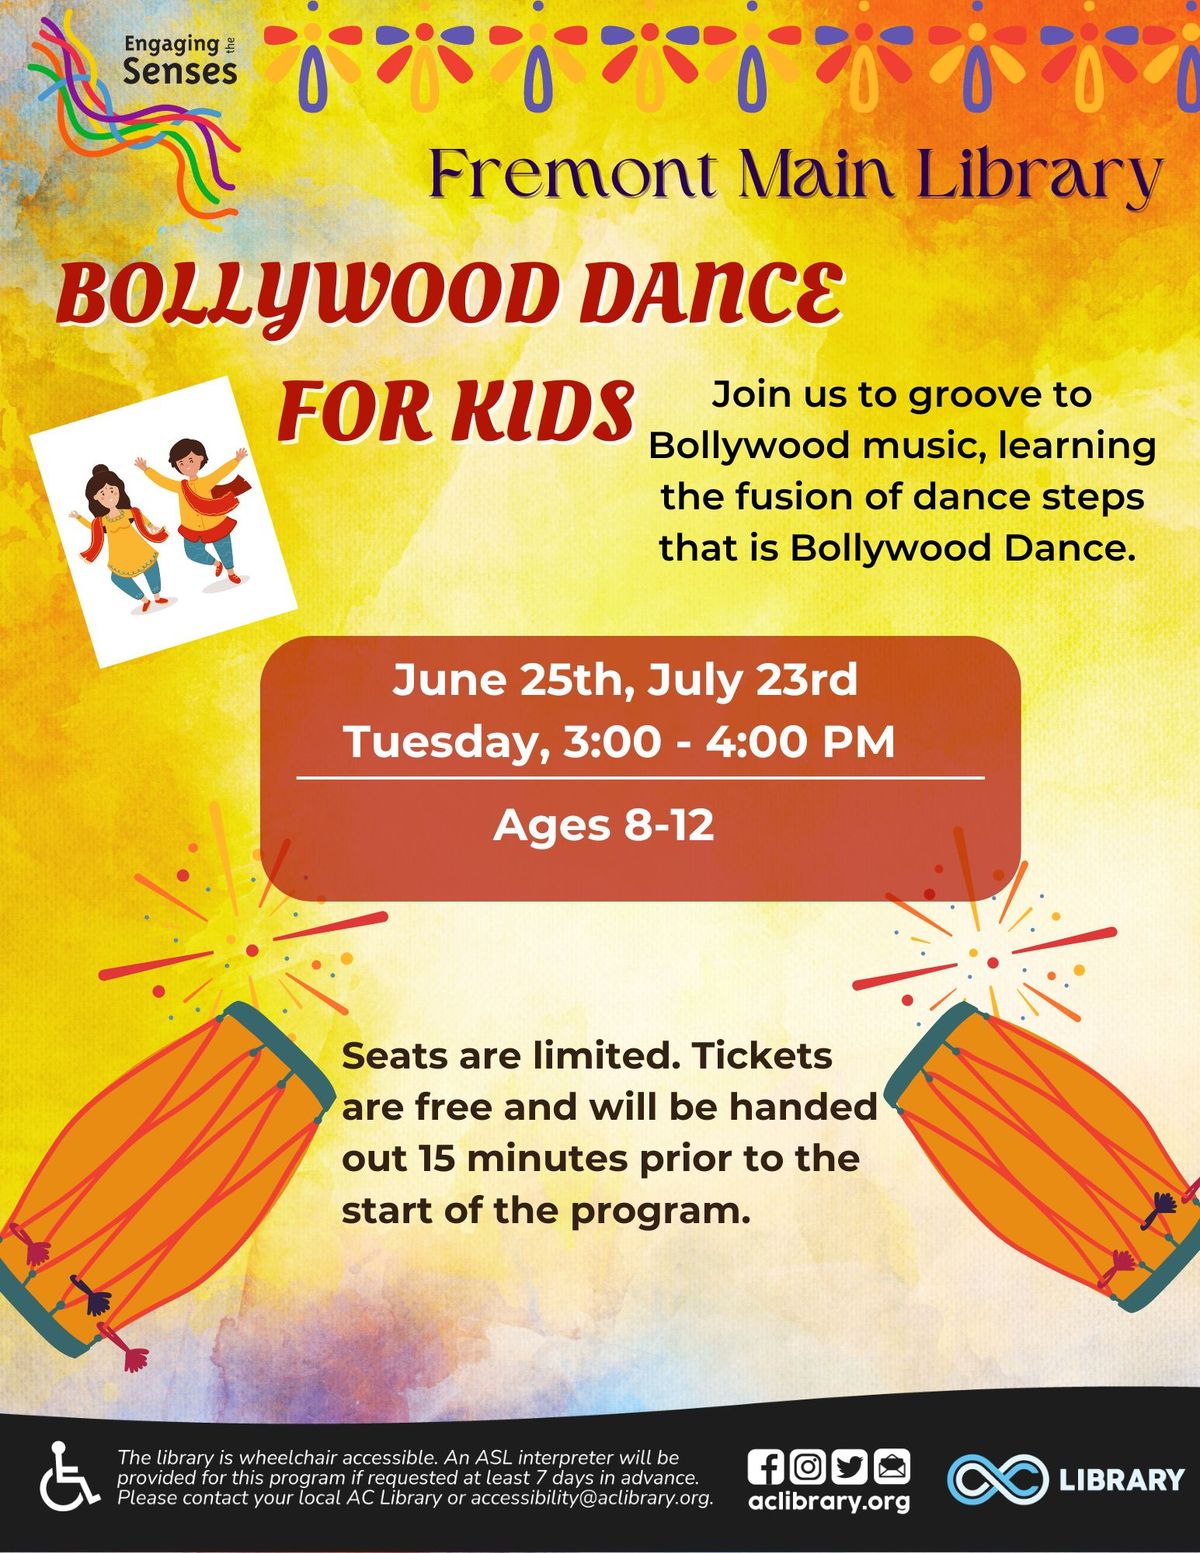 Bollywood Dance for Kids @ Fremont Main Library